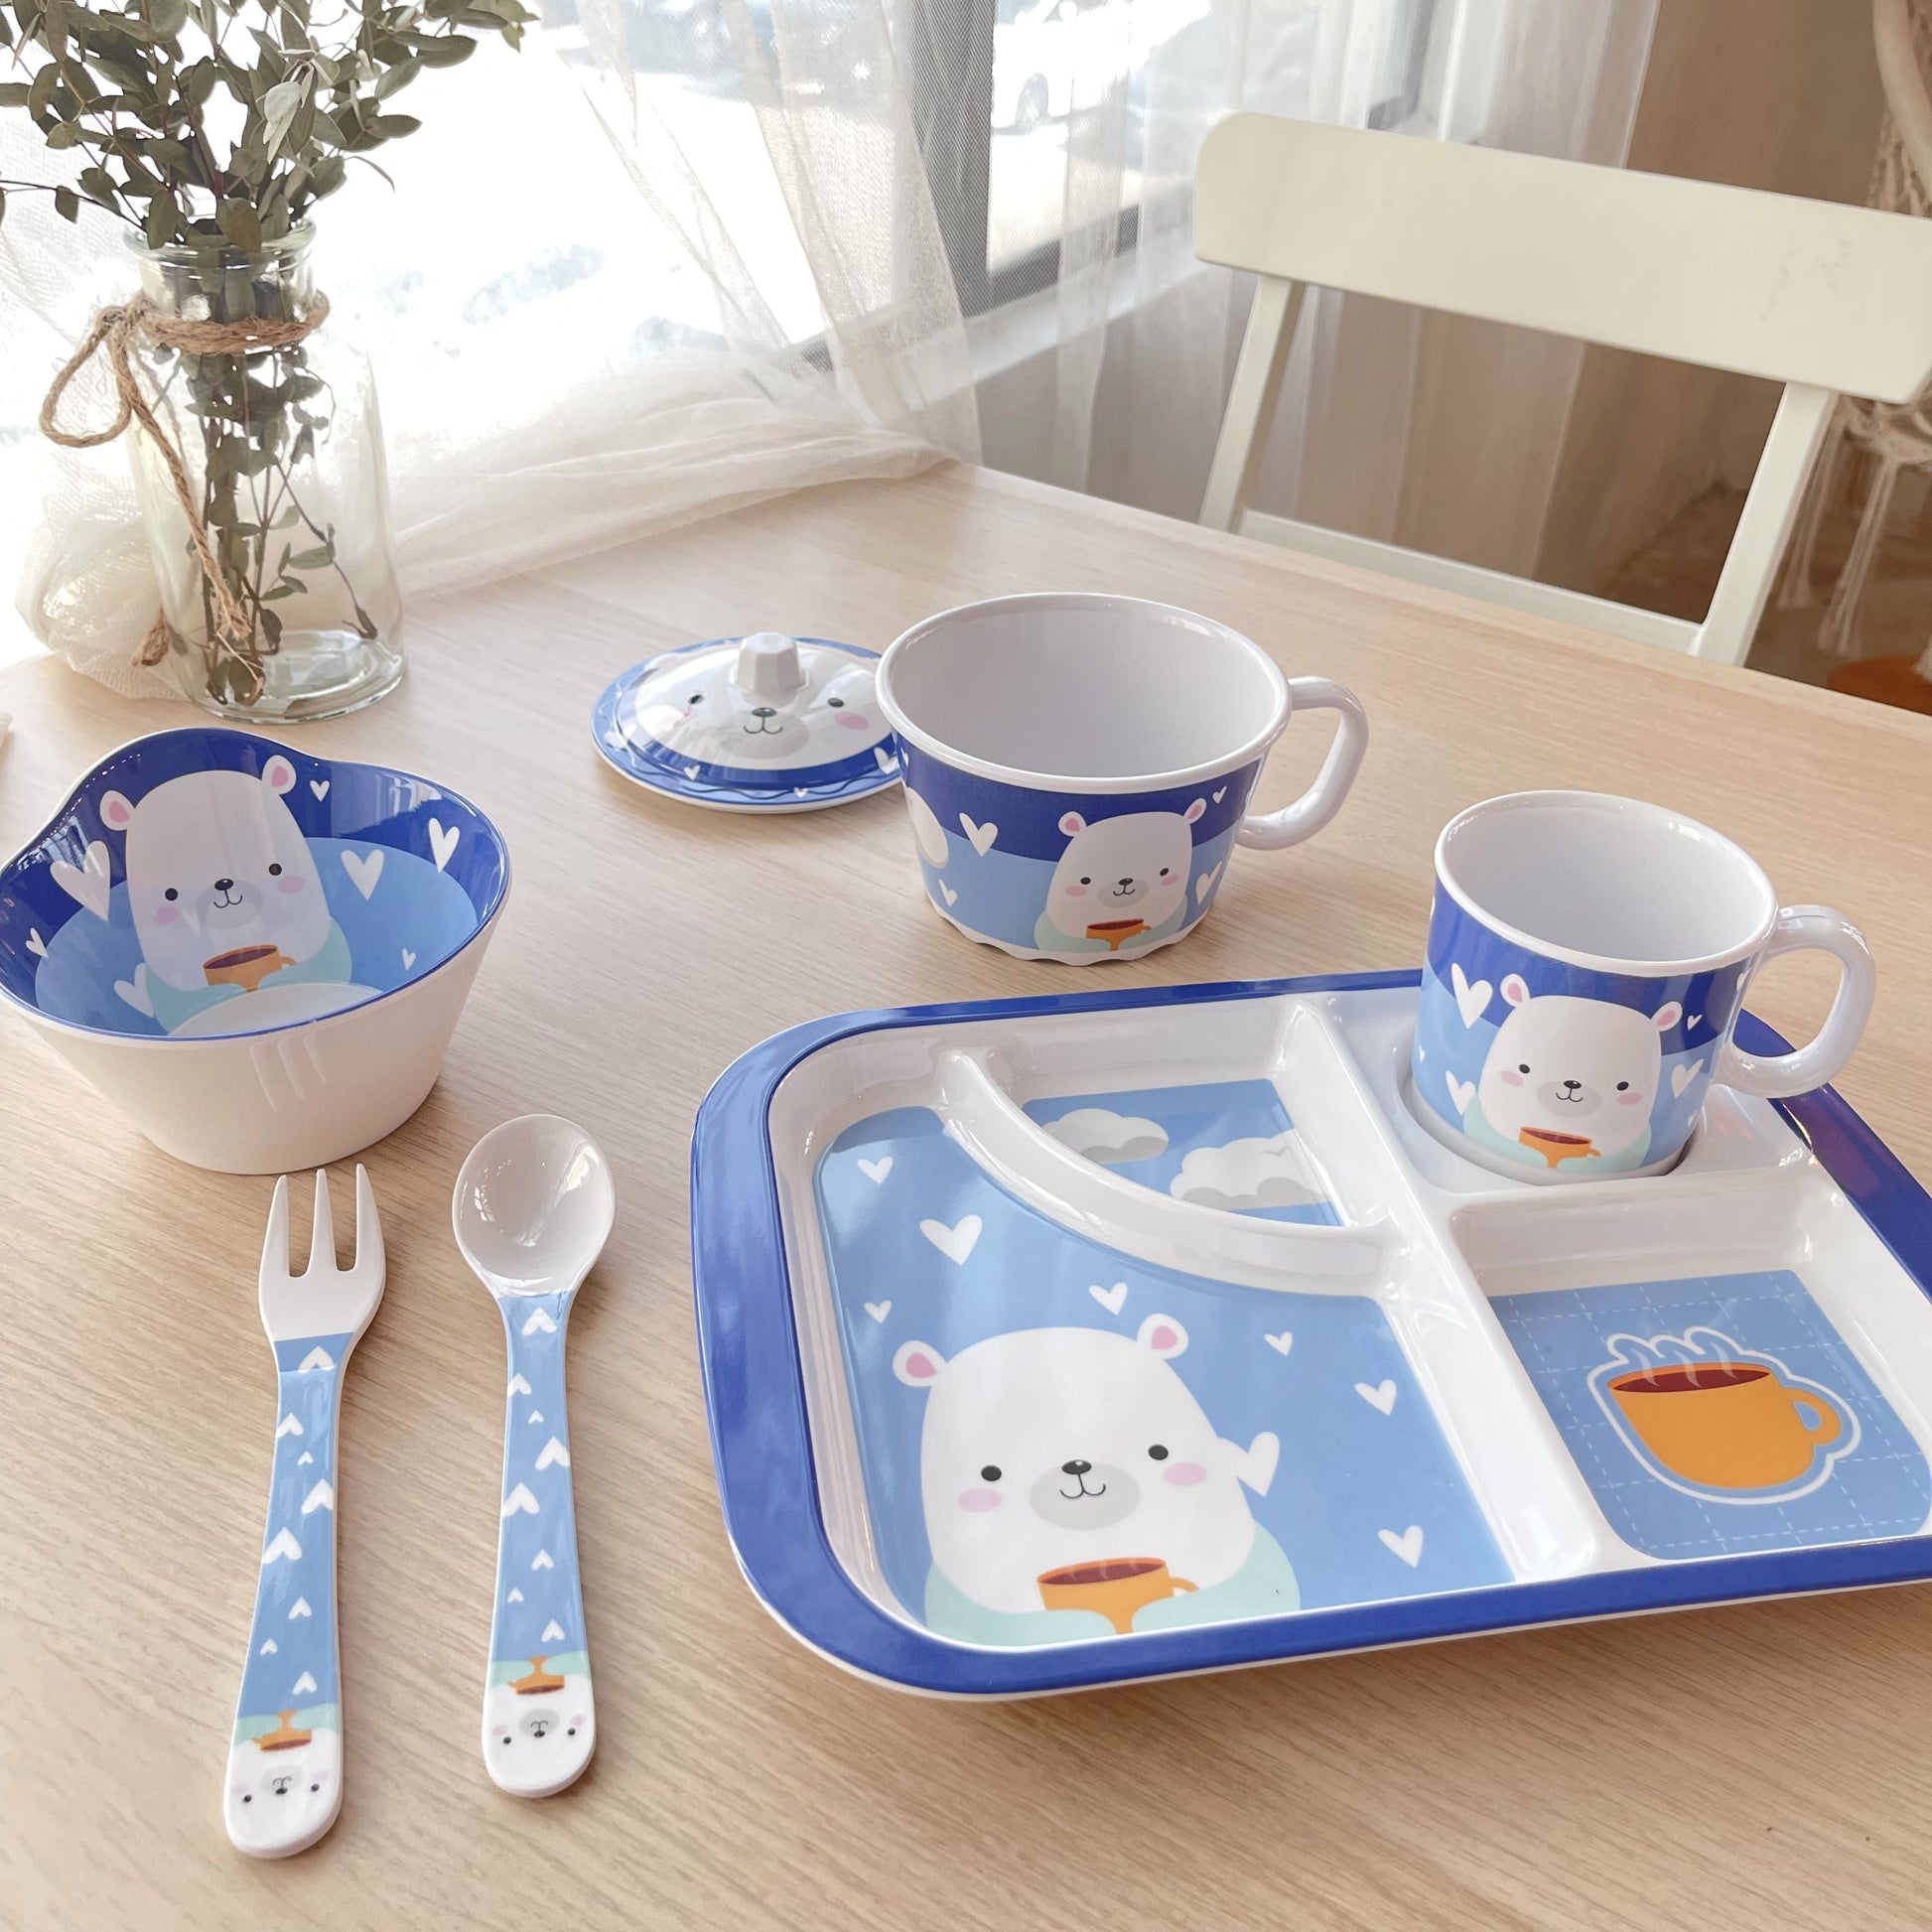 Children Melamine Plate - 4 Compartment Plate 11.5"- Bunny (Set of 1)